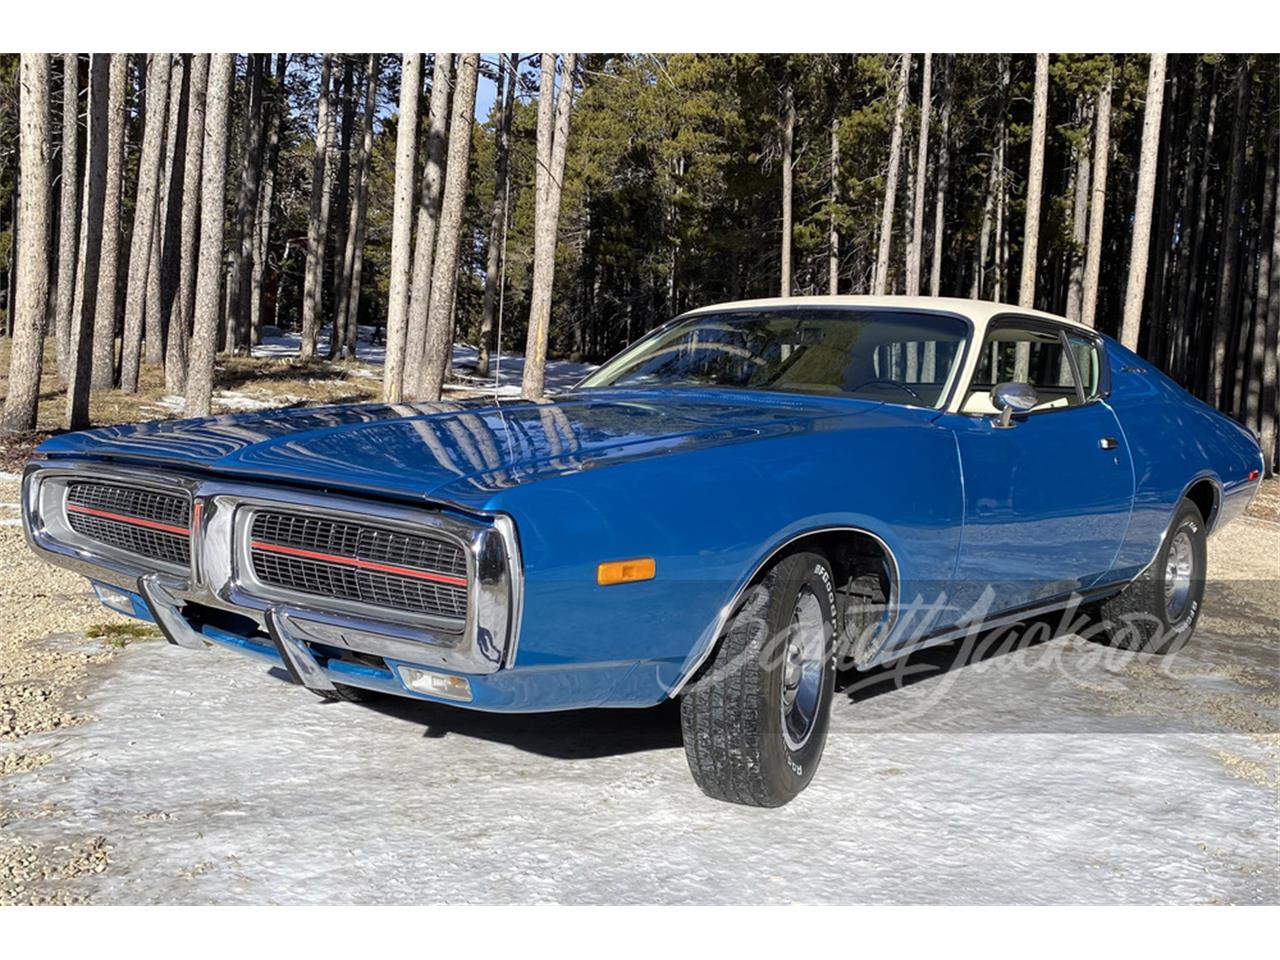 For Sale at Auction: 1972 Dodge Charger in Scottsdale, Arizona for sale in Scottsdale, AZ